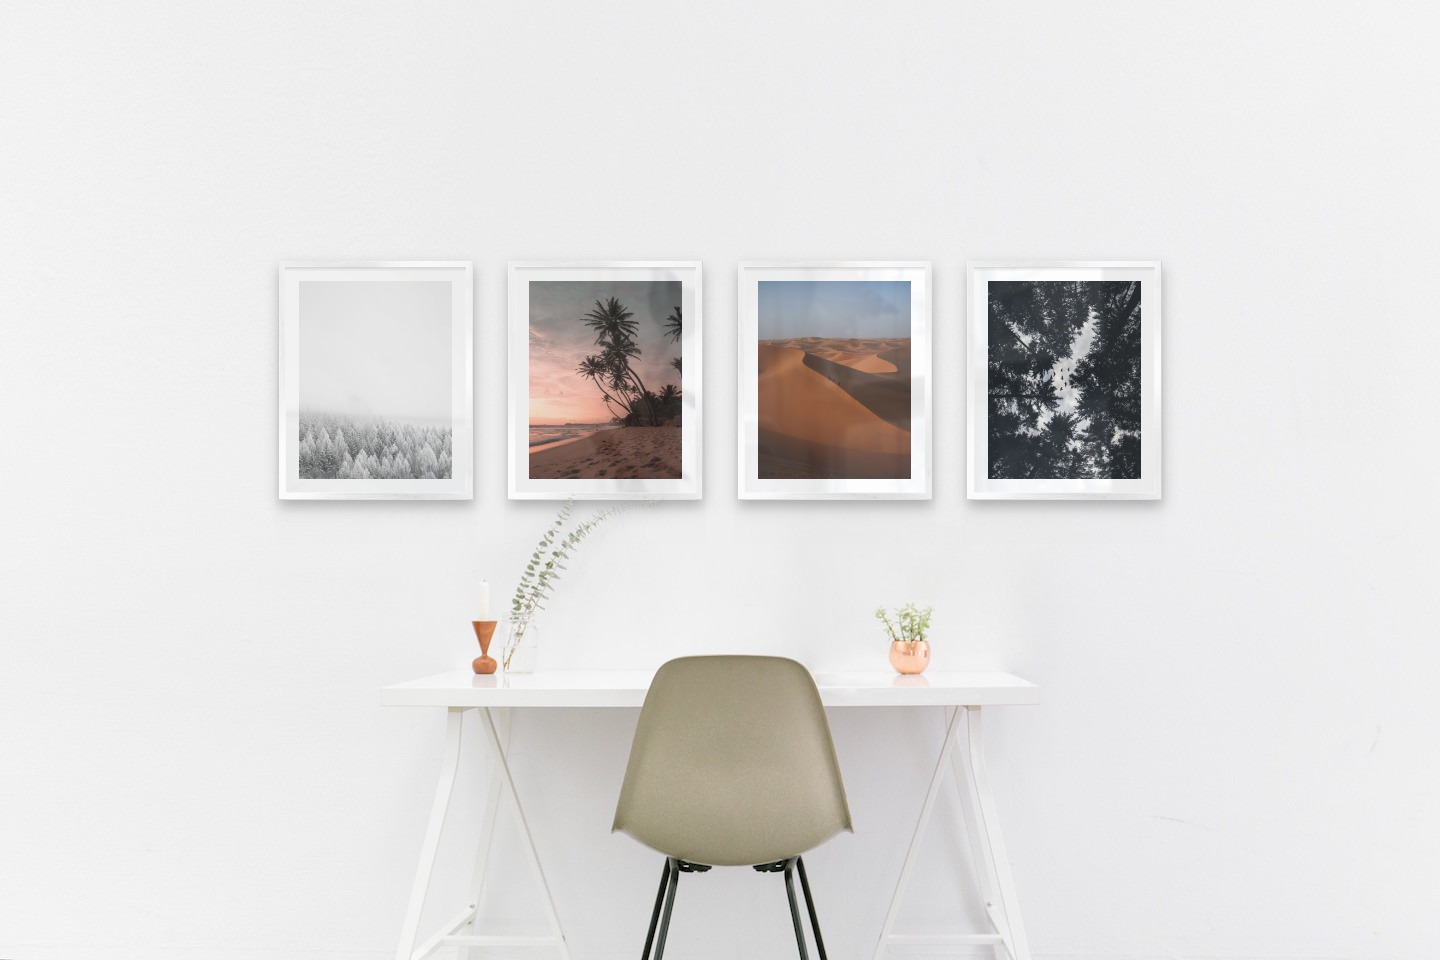 Gallery wall with picture frames in silver in sizes 40x50 with prints "Wooden tops in winter", "Beach at sunset", "Desert" and "Wooden tops and birds"